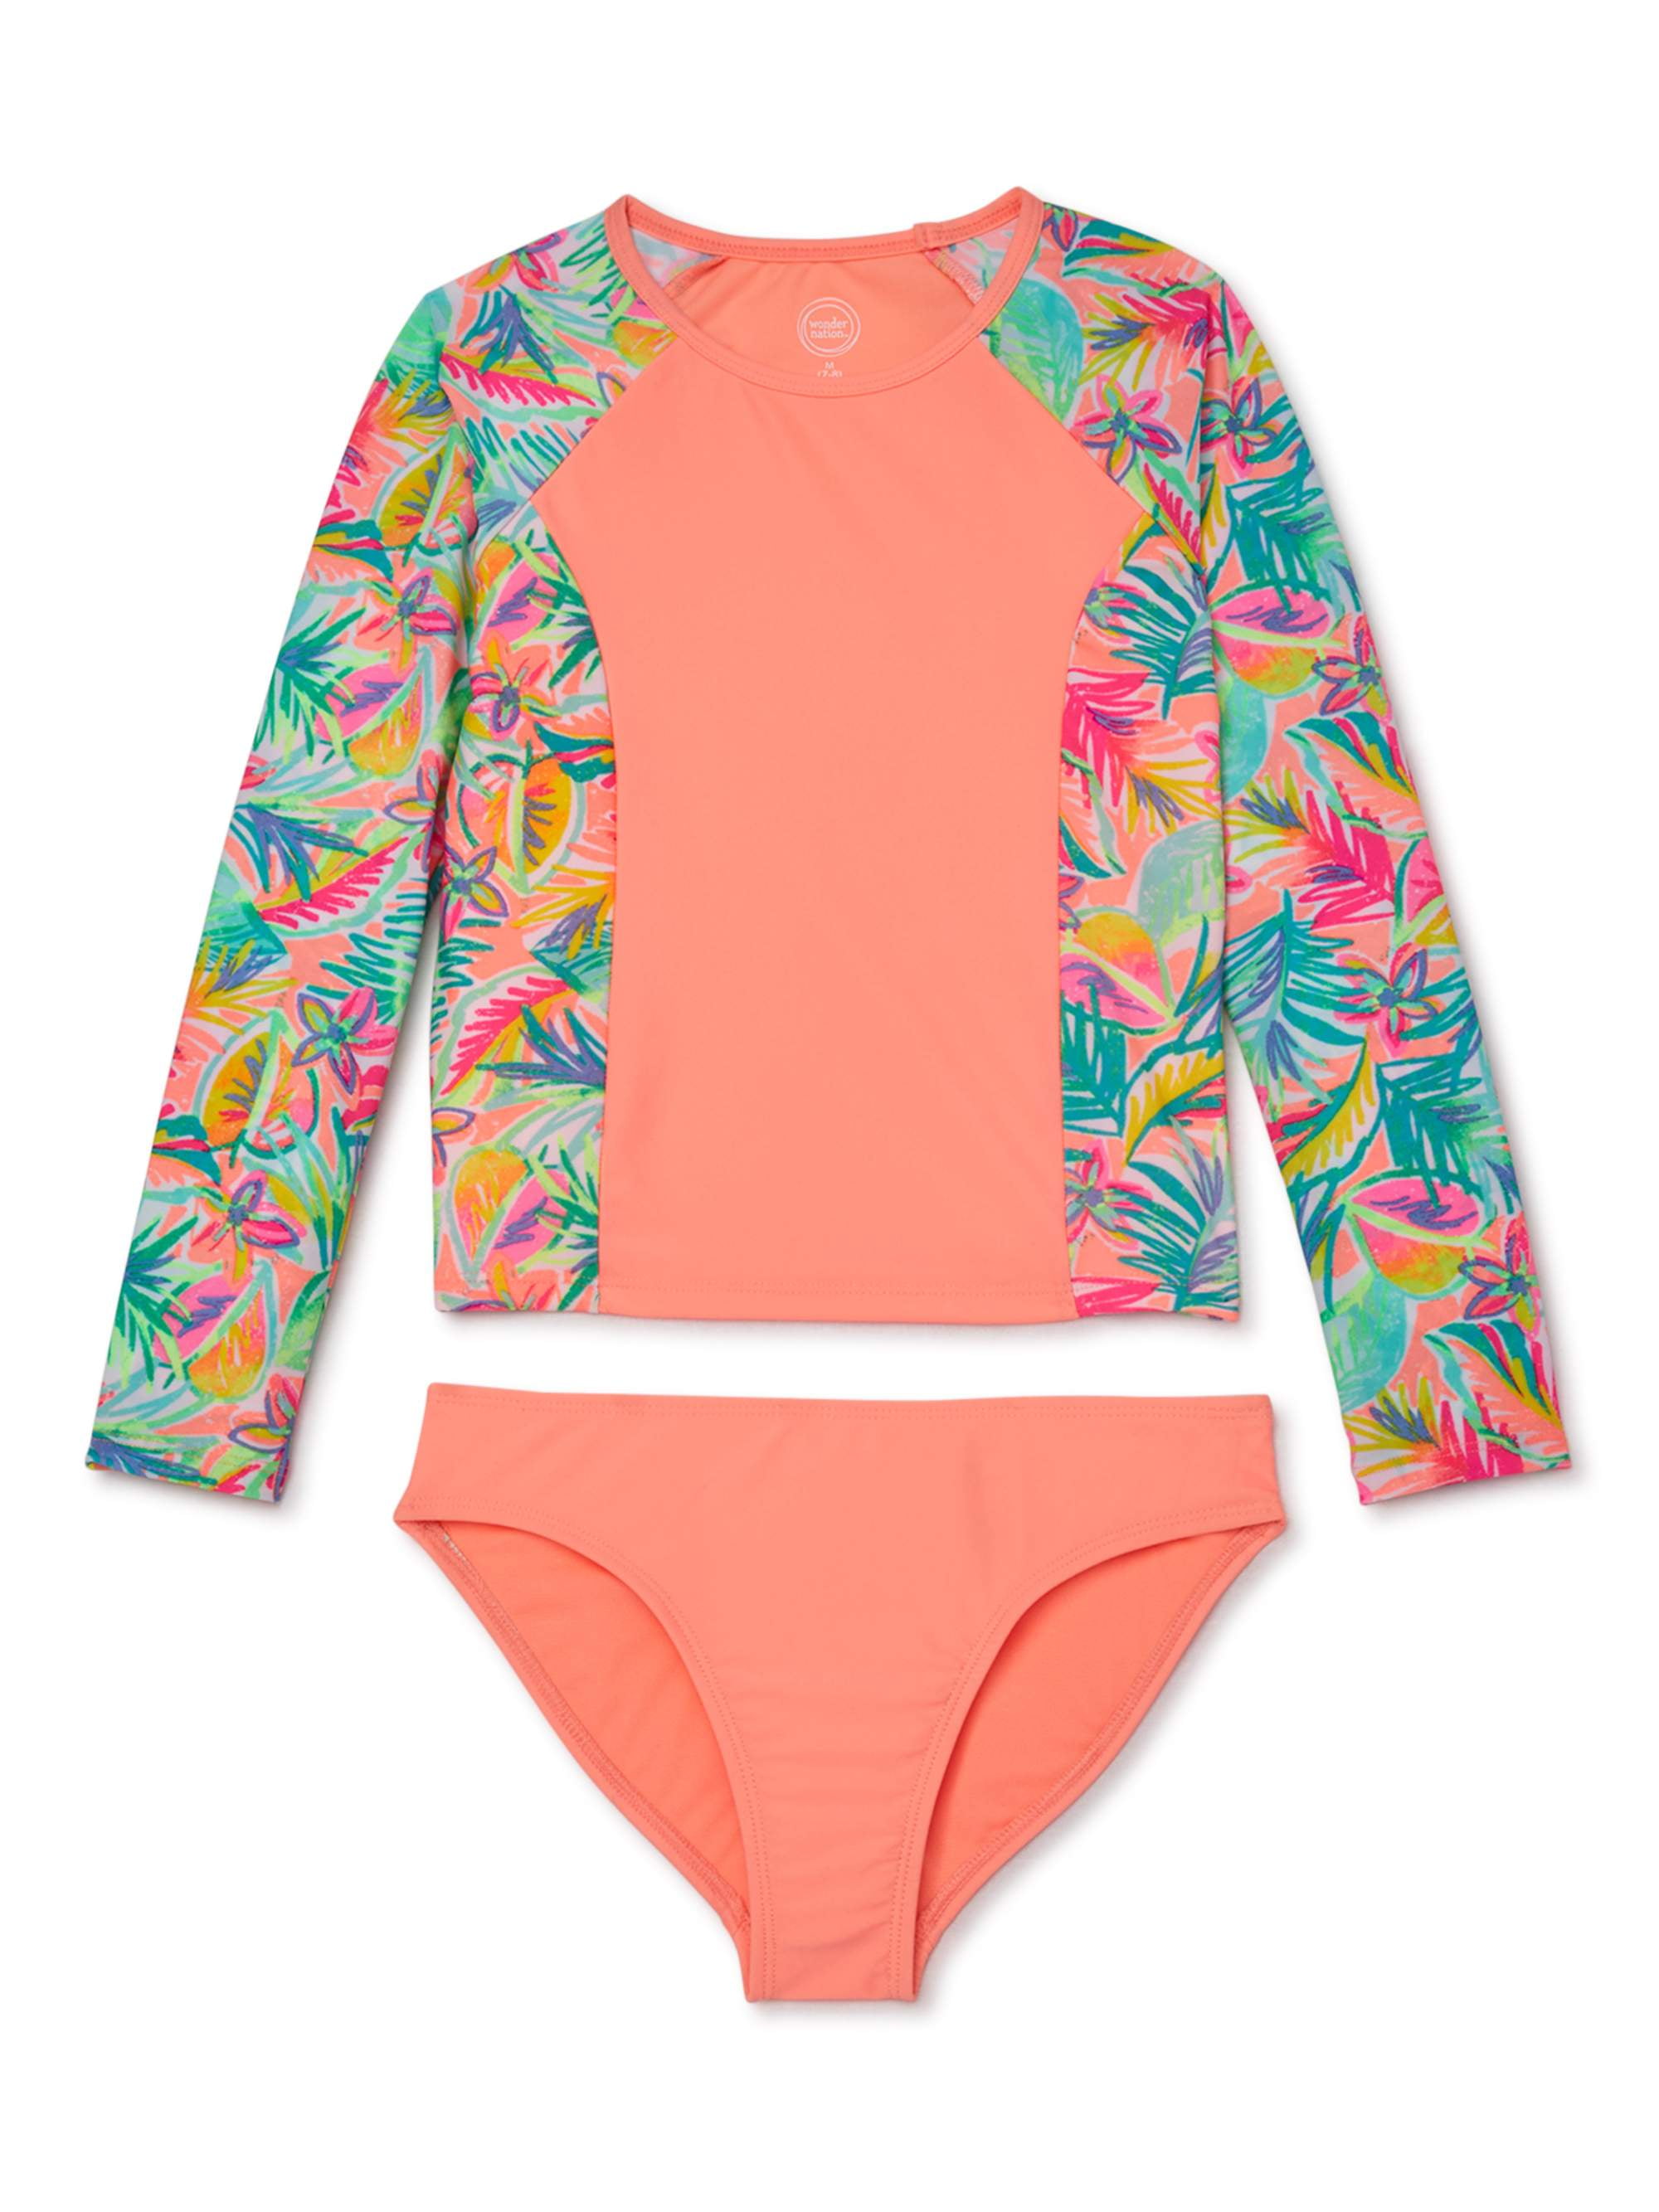 moily Baby Little Girls Floral Tankini Set Long Sleeve Rash Guard Shirt with Bottoms Surf Bathing Suit